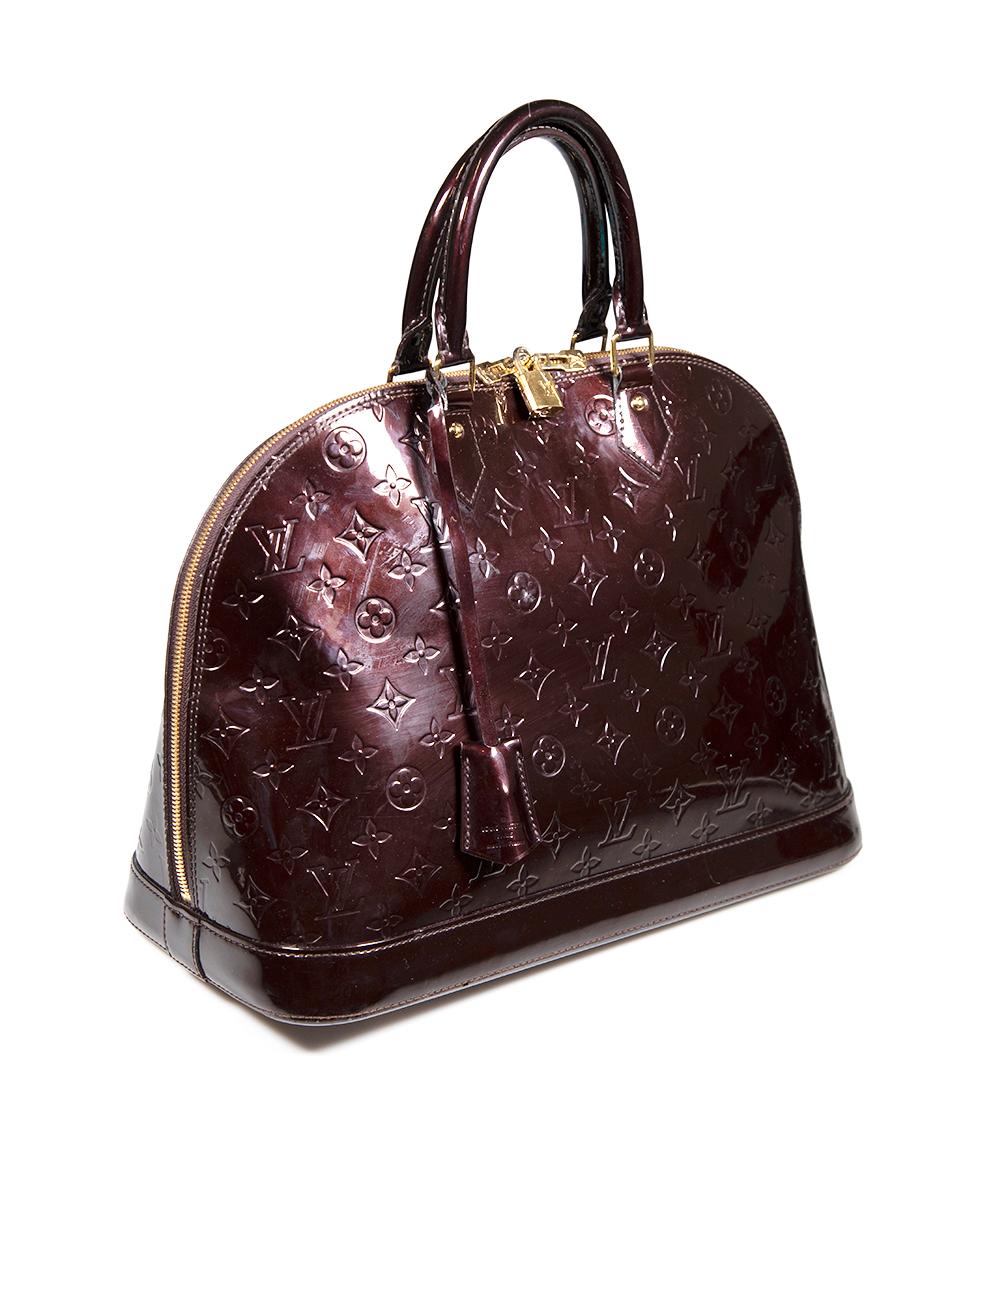 CONDITION is Very good. Minimal wear to bag is evident. Minimal wear to the base corners and rear right with abrasions to the leather. There are also marks to the lining on this used Louis Vuitton designer resale item.
 
 
 
 Details
 
 
 2011
 
